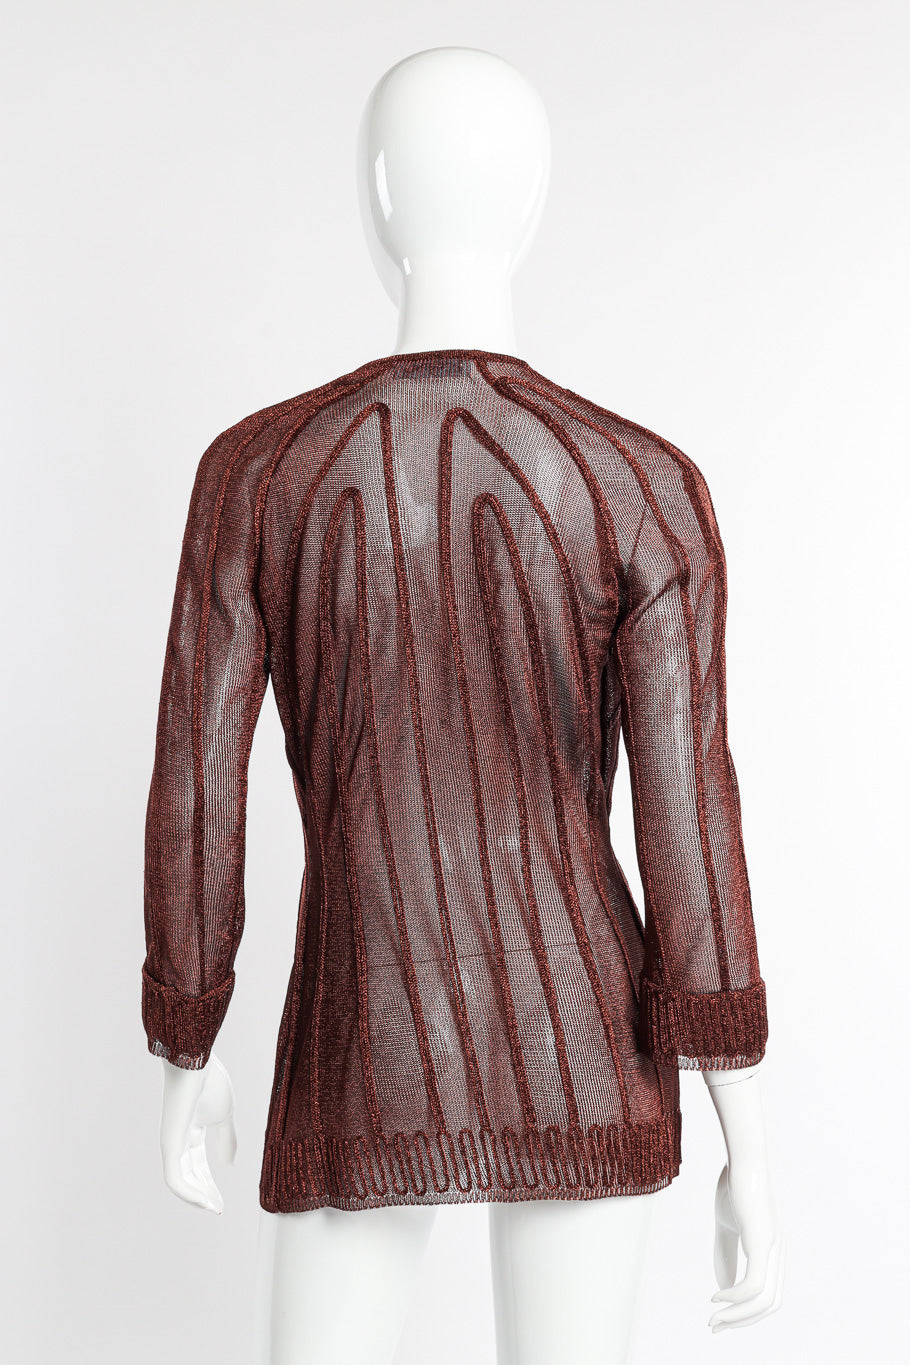 Vintage Thierry Mugler Metallic Cable Cardigan back on mannequin @recessla